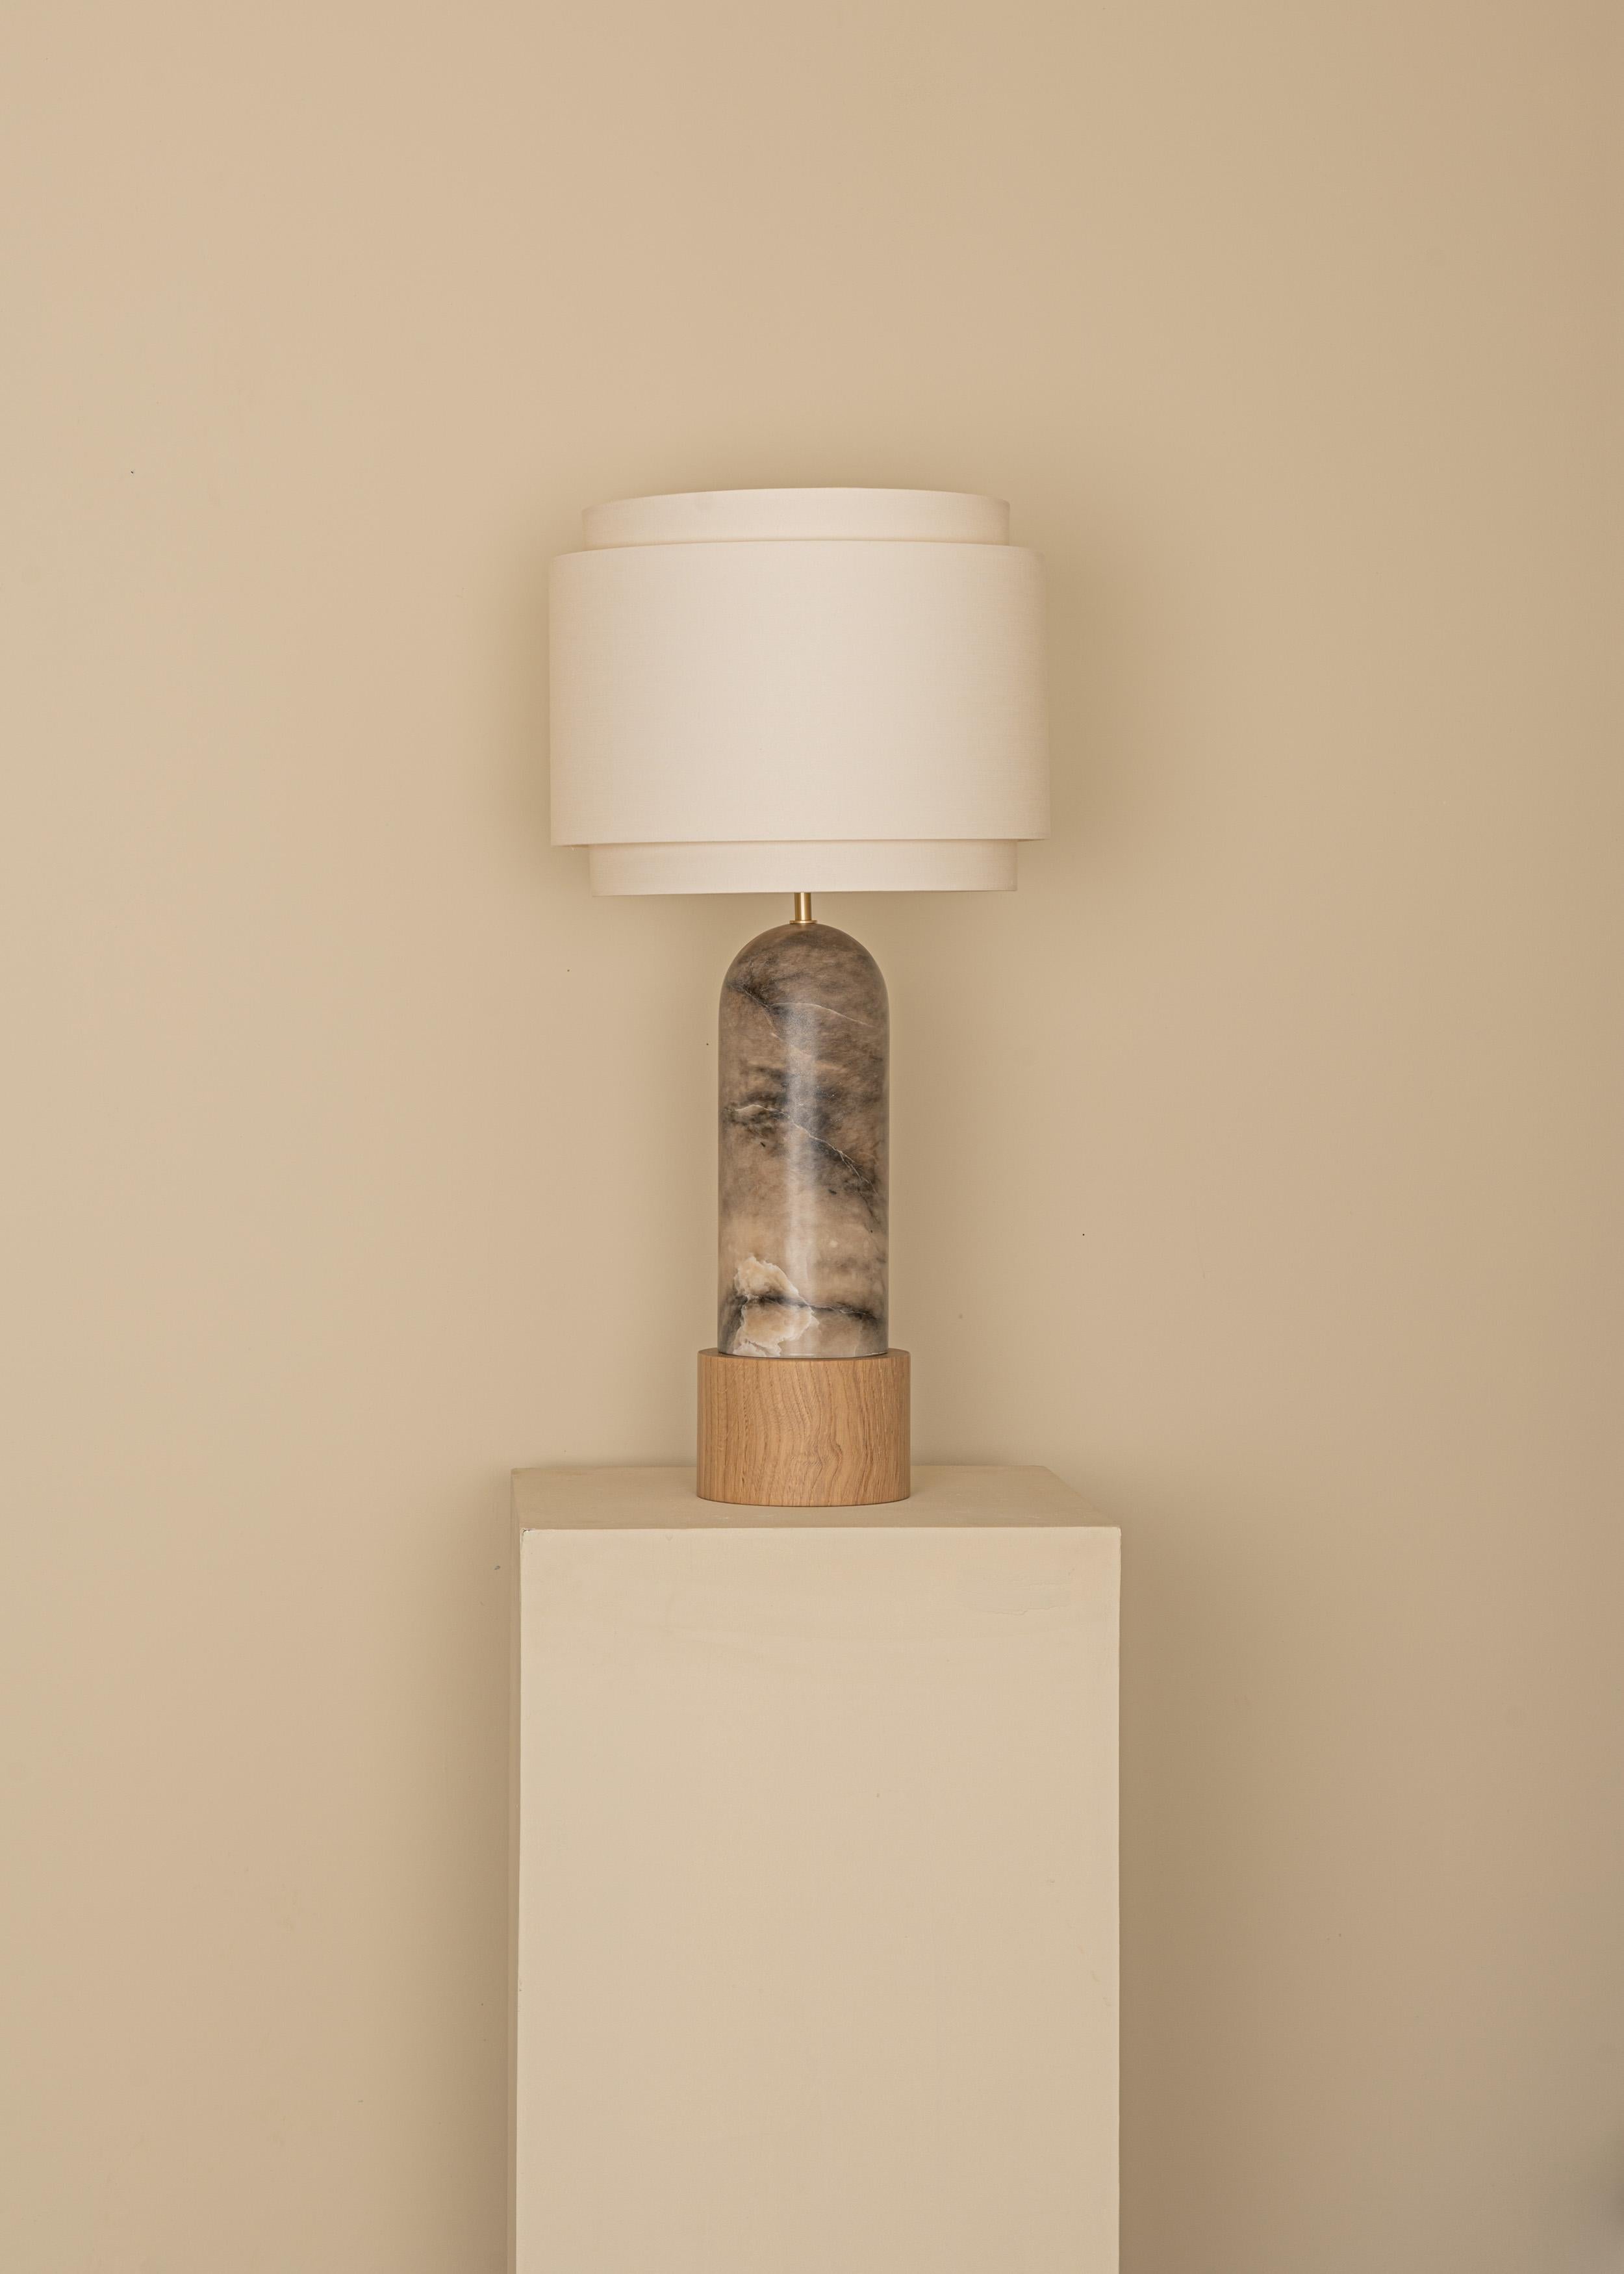 Tobacco Alabaster And Oak Base Pura Kelo Double Table Lamp by Simone & Marcel
Dimensions: D 35 x W 35 x H 69 cm.
Materials: Brass, cotton, oak and tobacco alabaster.

Also available in different marble, wood and alabaster options and finishes.